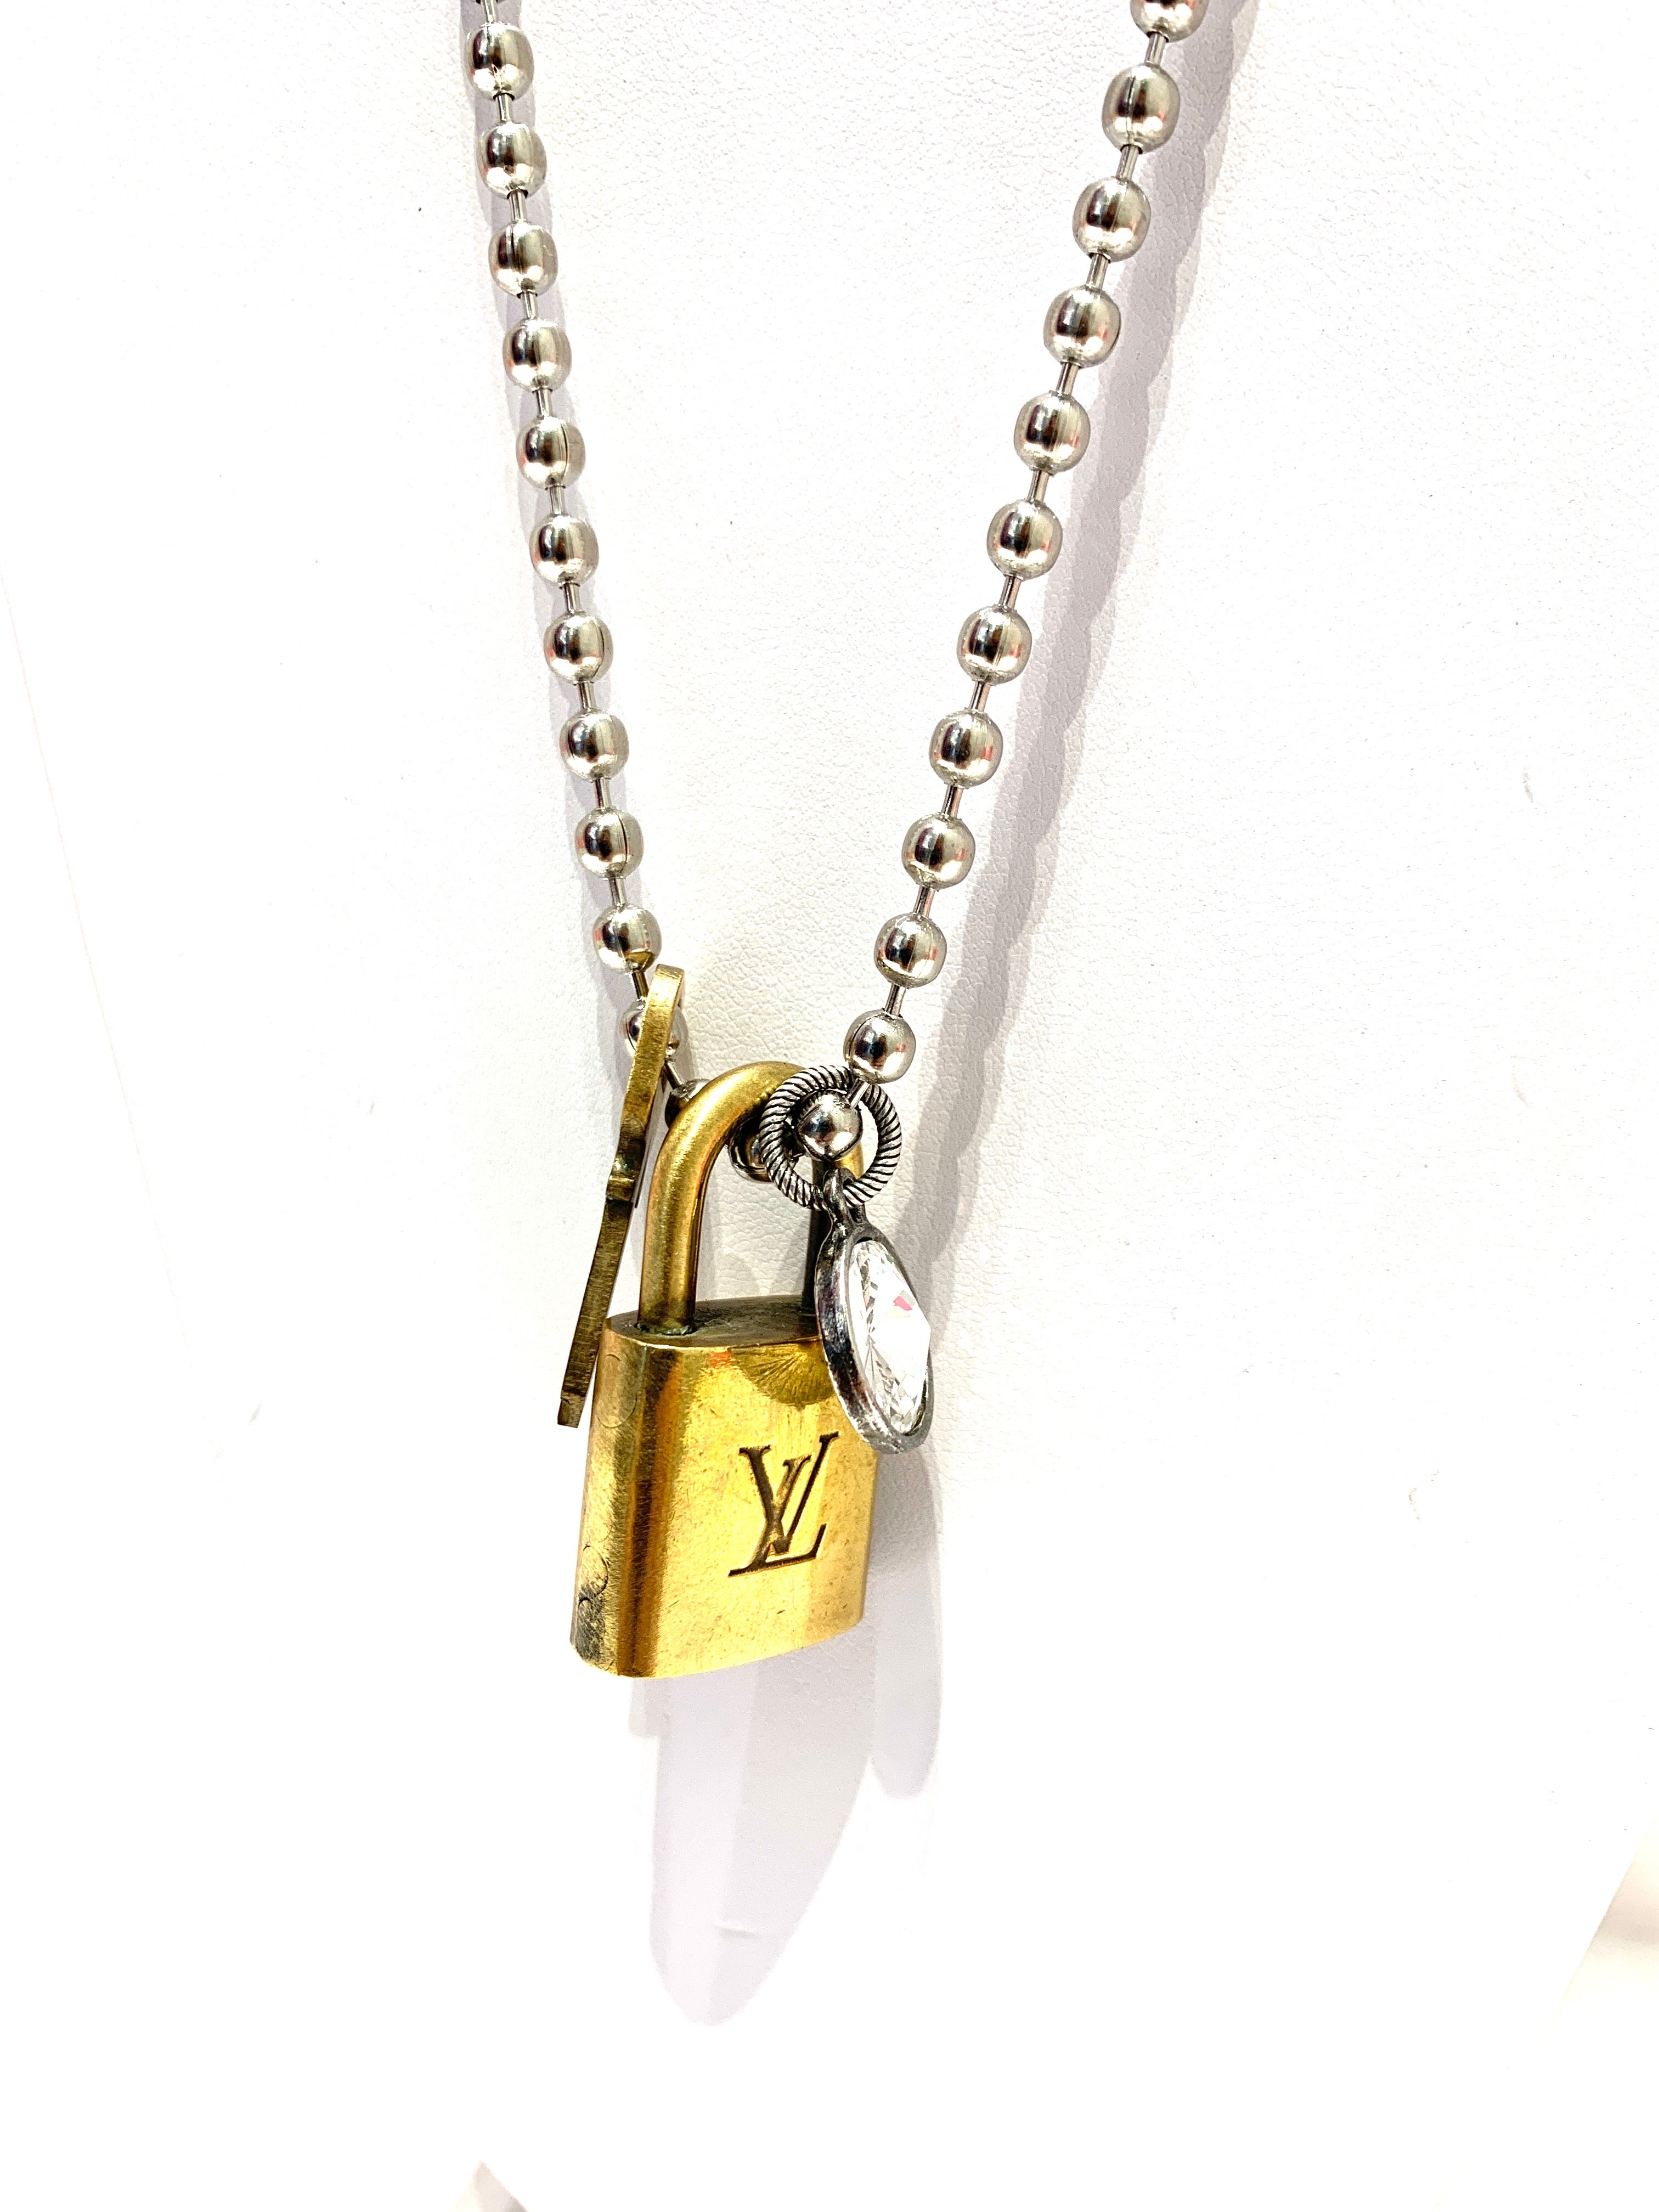 Pin by Crystal on Louis Vuitton  Cross necklace, Necklace, Pendant necklace